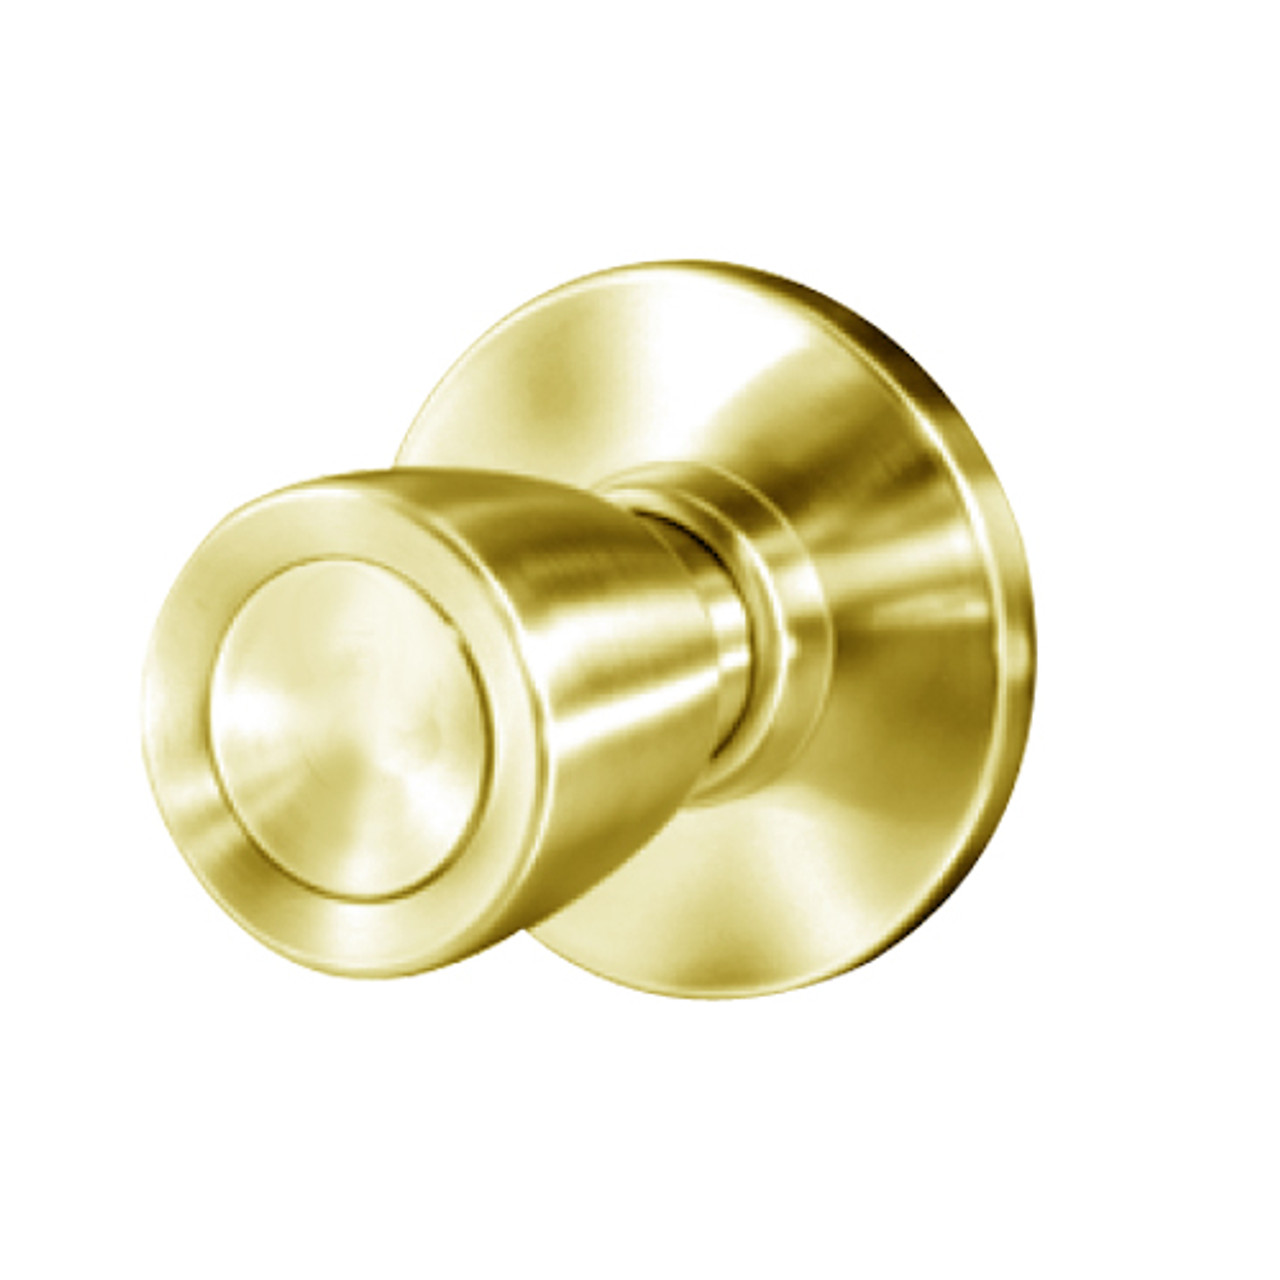 8K30Y6AS3605 Best 8K Series Exit Heavy Duty Cylindrical Knob Locks with Tulip Style in Bright Brass